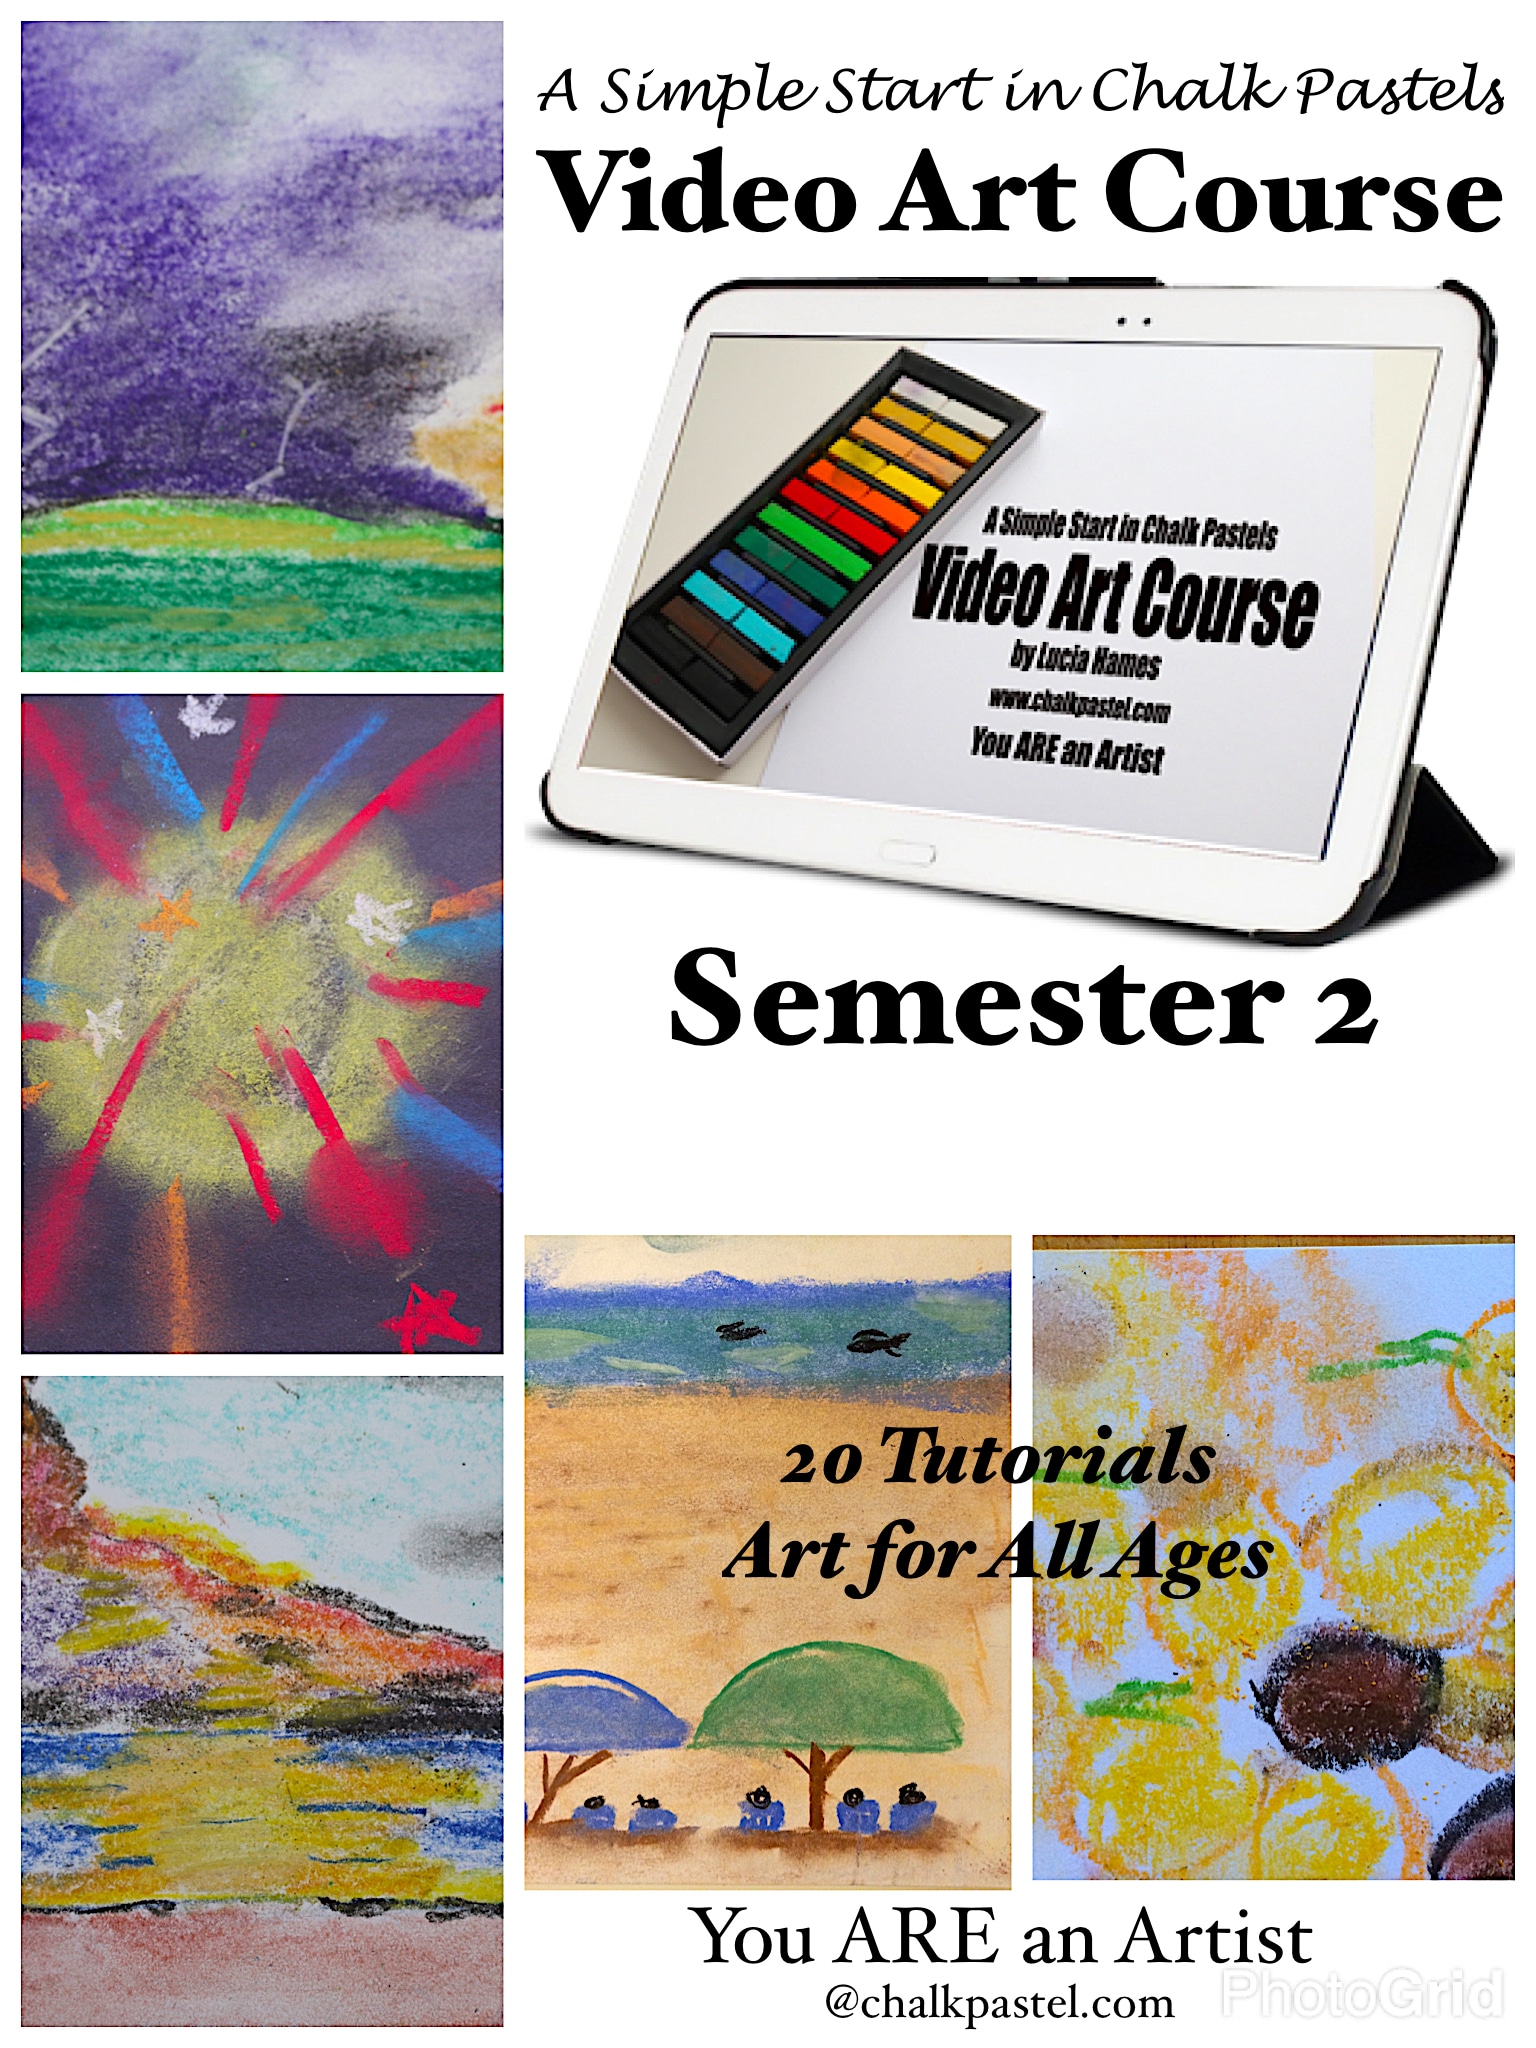 A Simple Start in Chalk Pastels Video Art Course (Semester 2) - You ARE